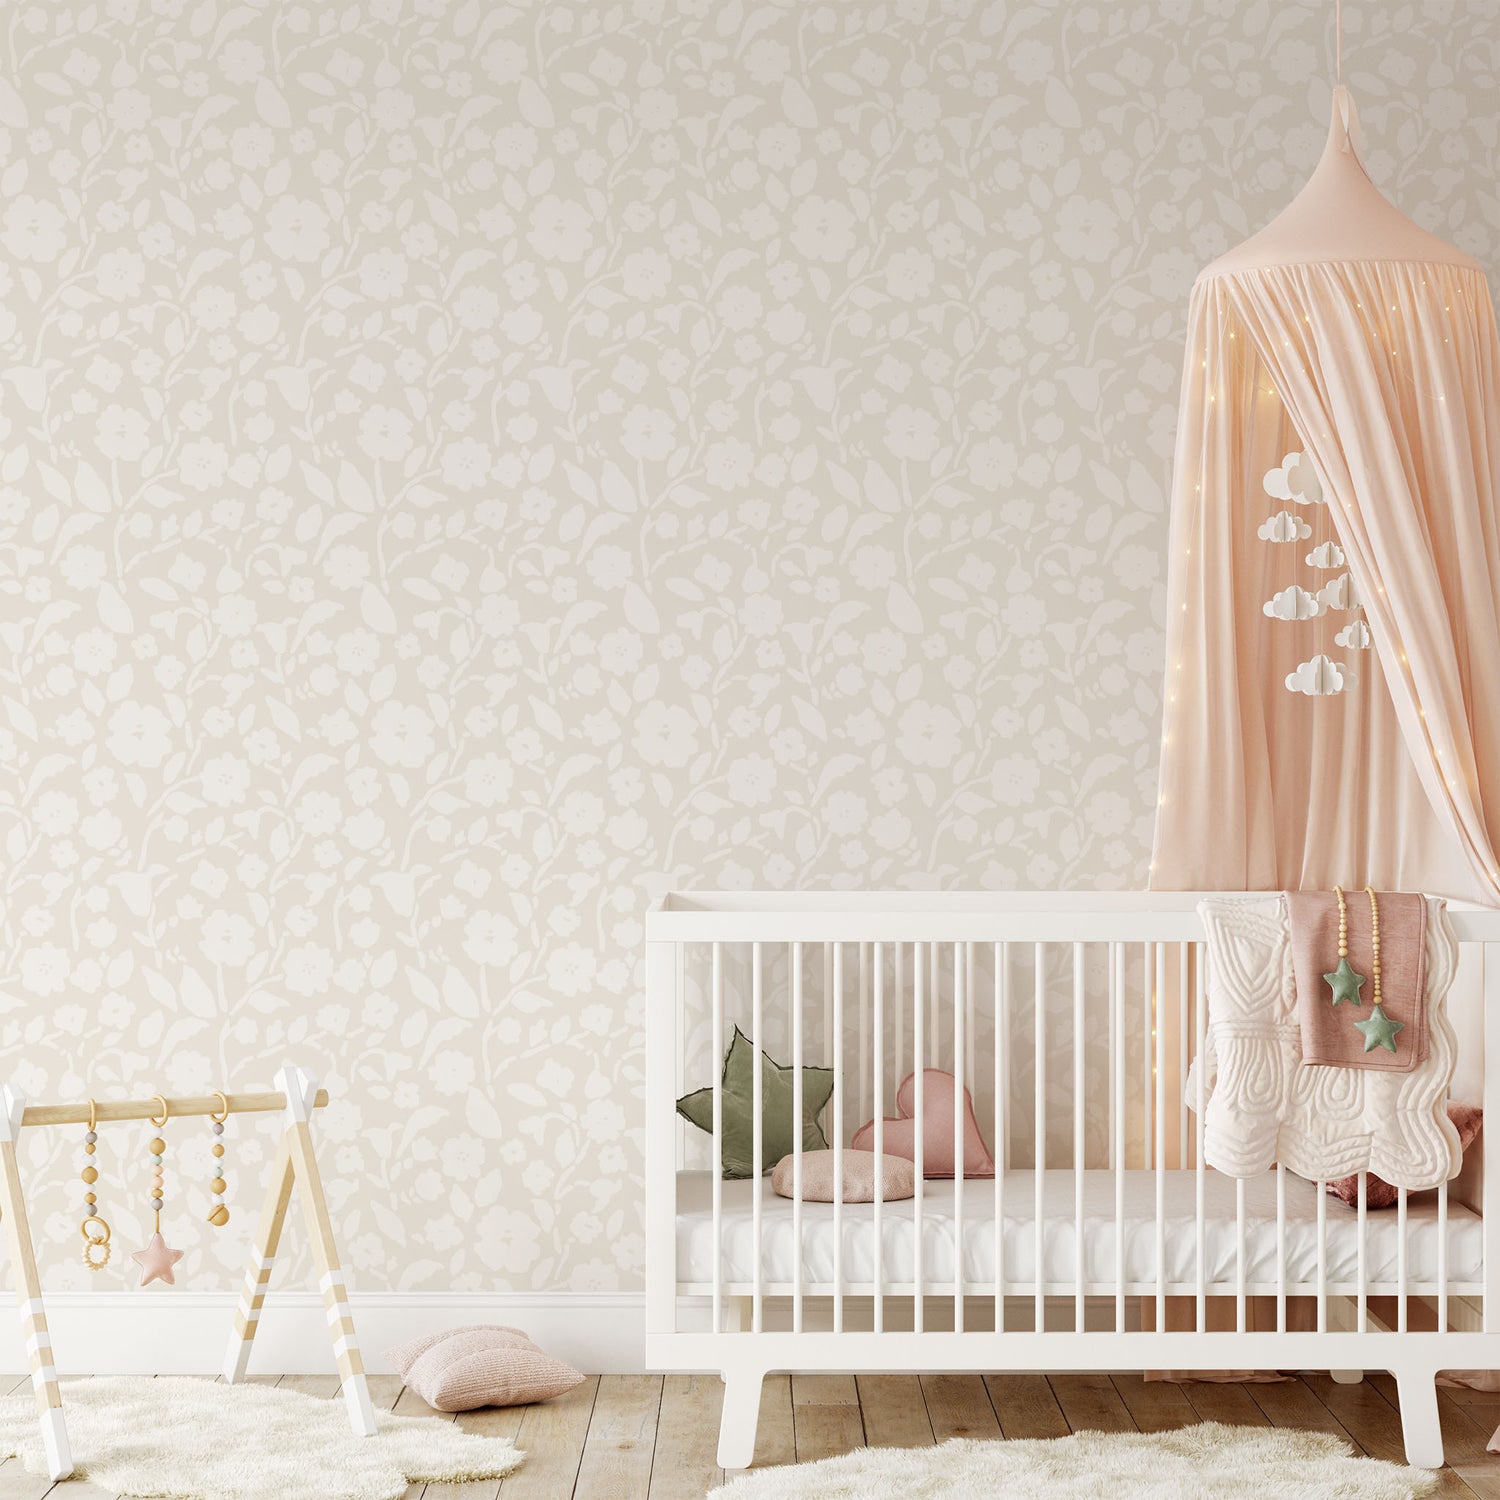 Add a touch of femininity to your space with our Lexington Wallpaper in a cream hue shown in full size image.